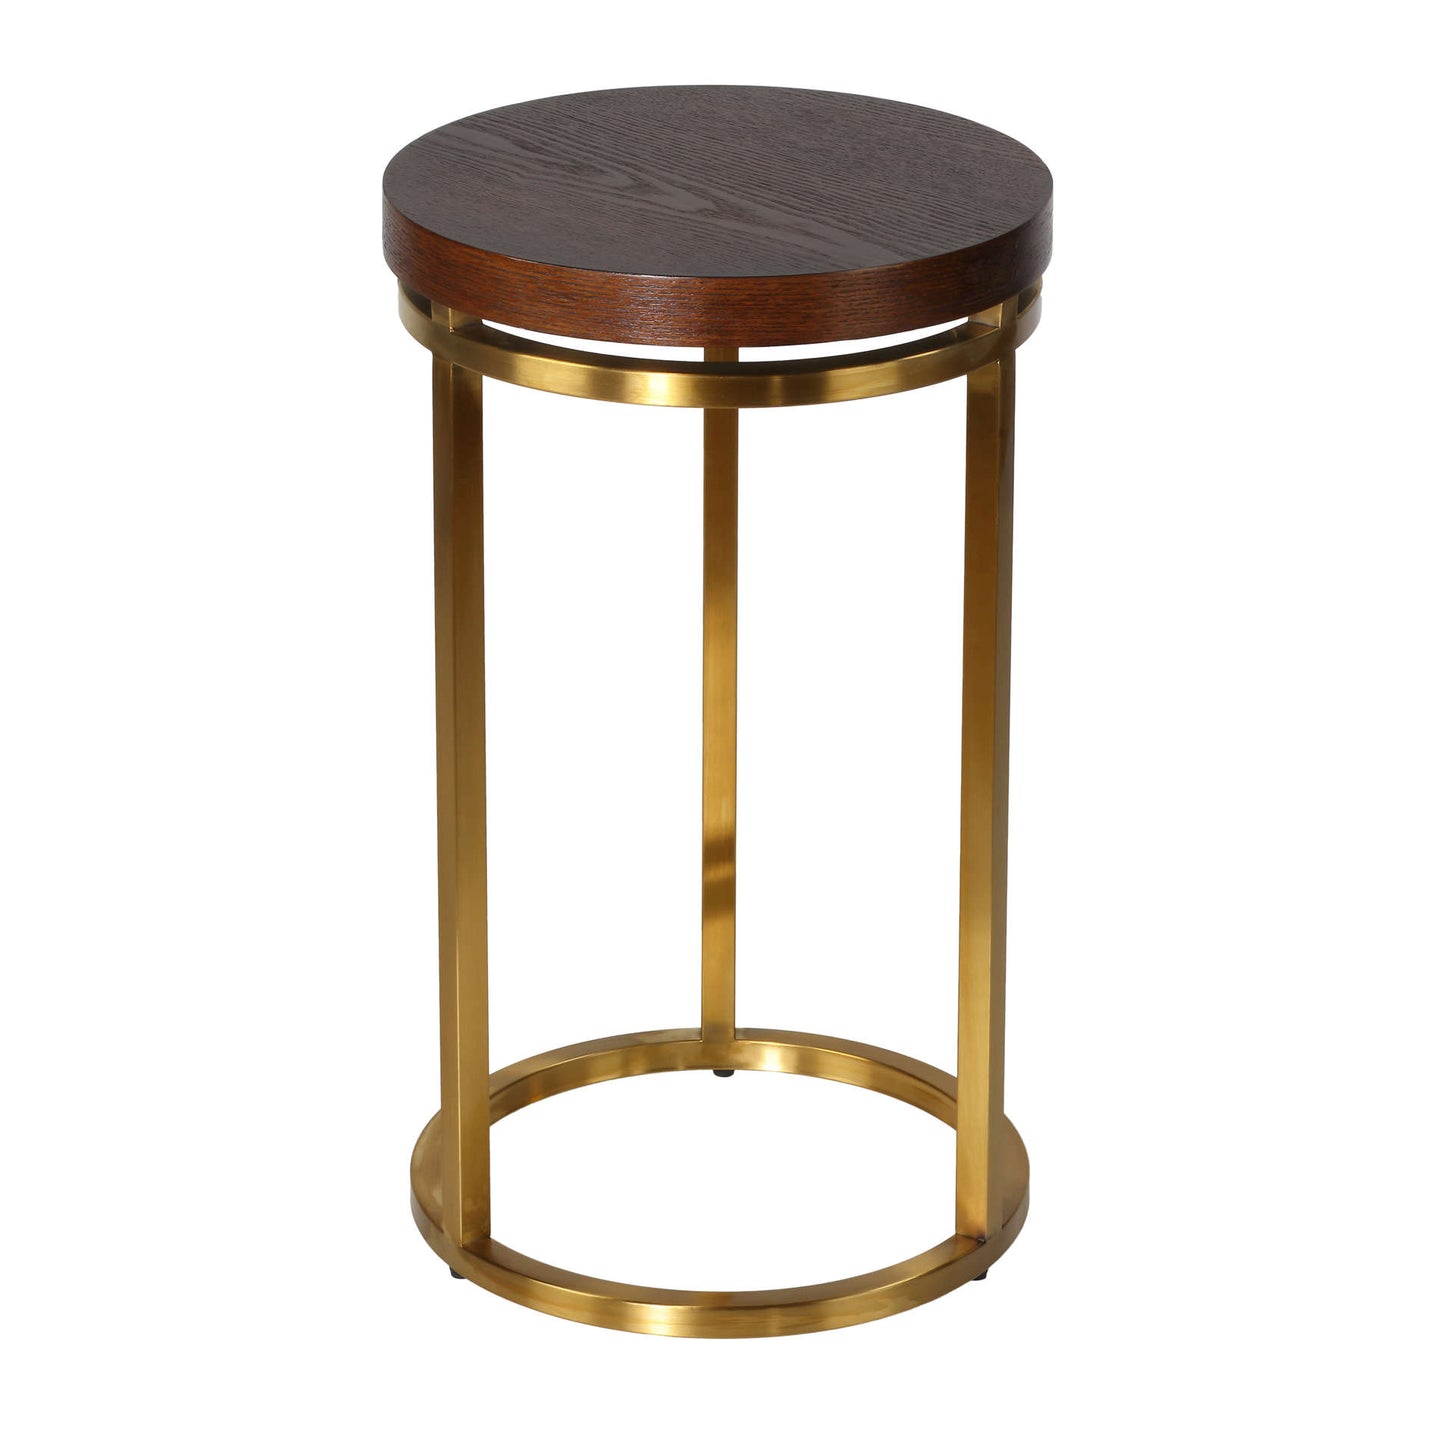 Cortesi Home Kufu Round Side Table in Gold Stainless Steel and Wood Top, 14